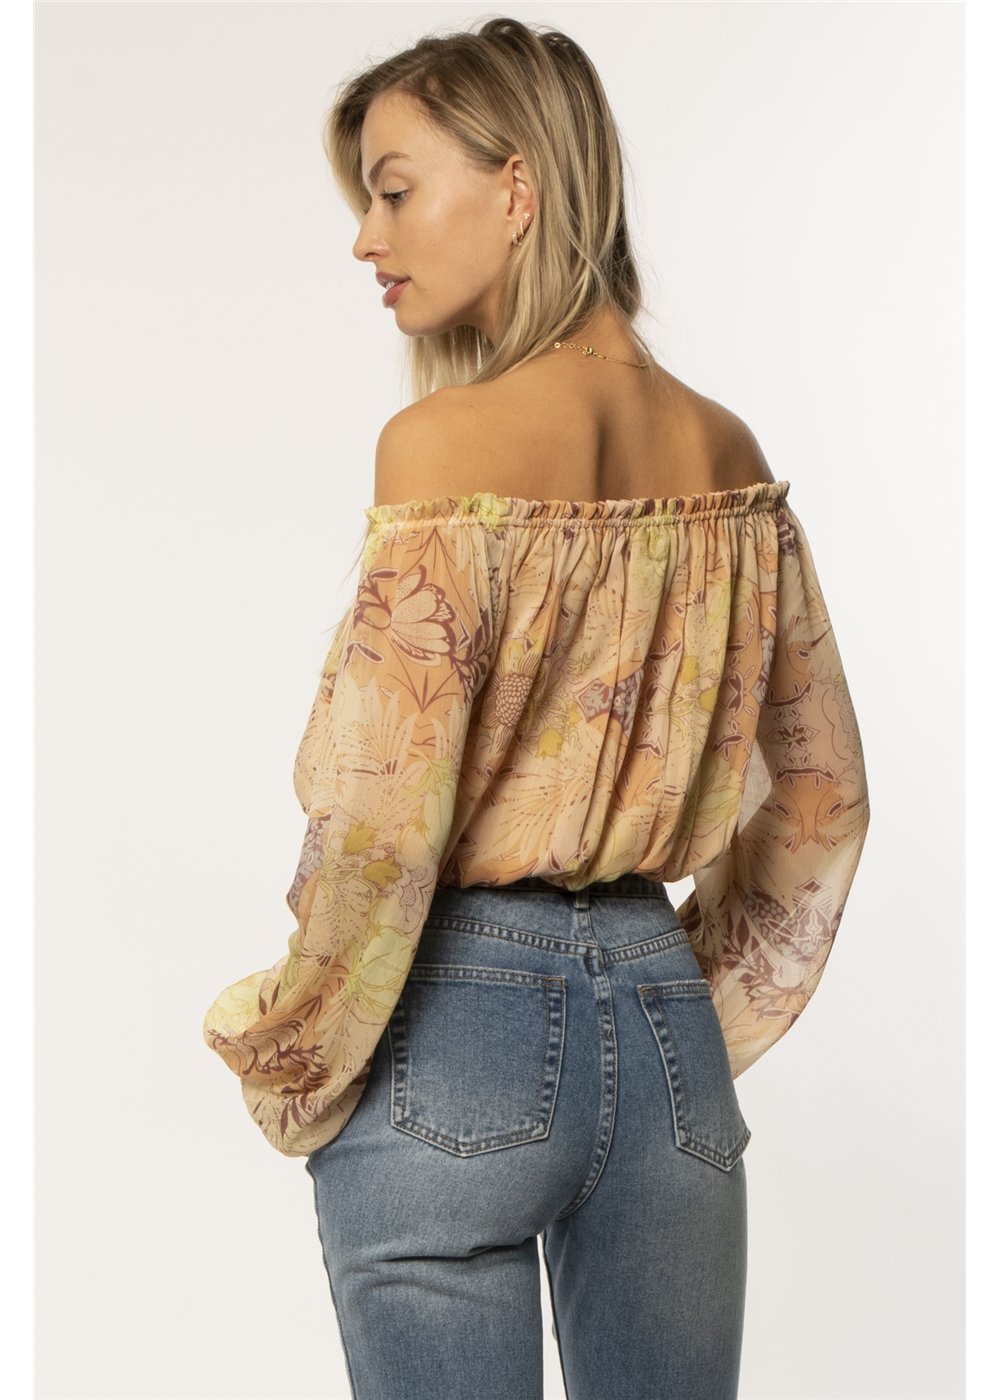 Amuse Society Women's Yasmin Long Sleeve Woven Top in Toffee. Back View 